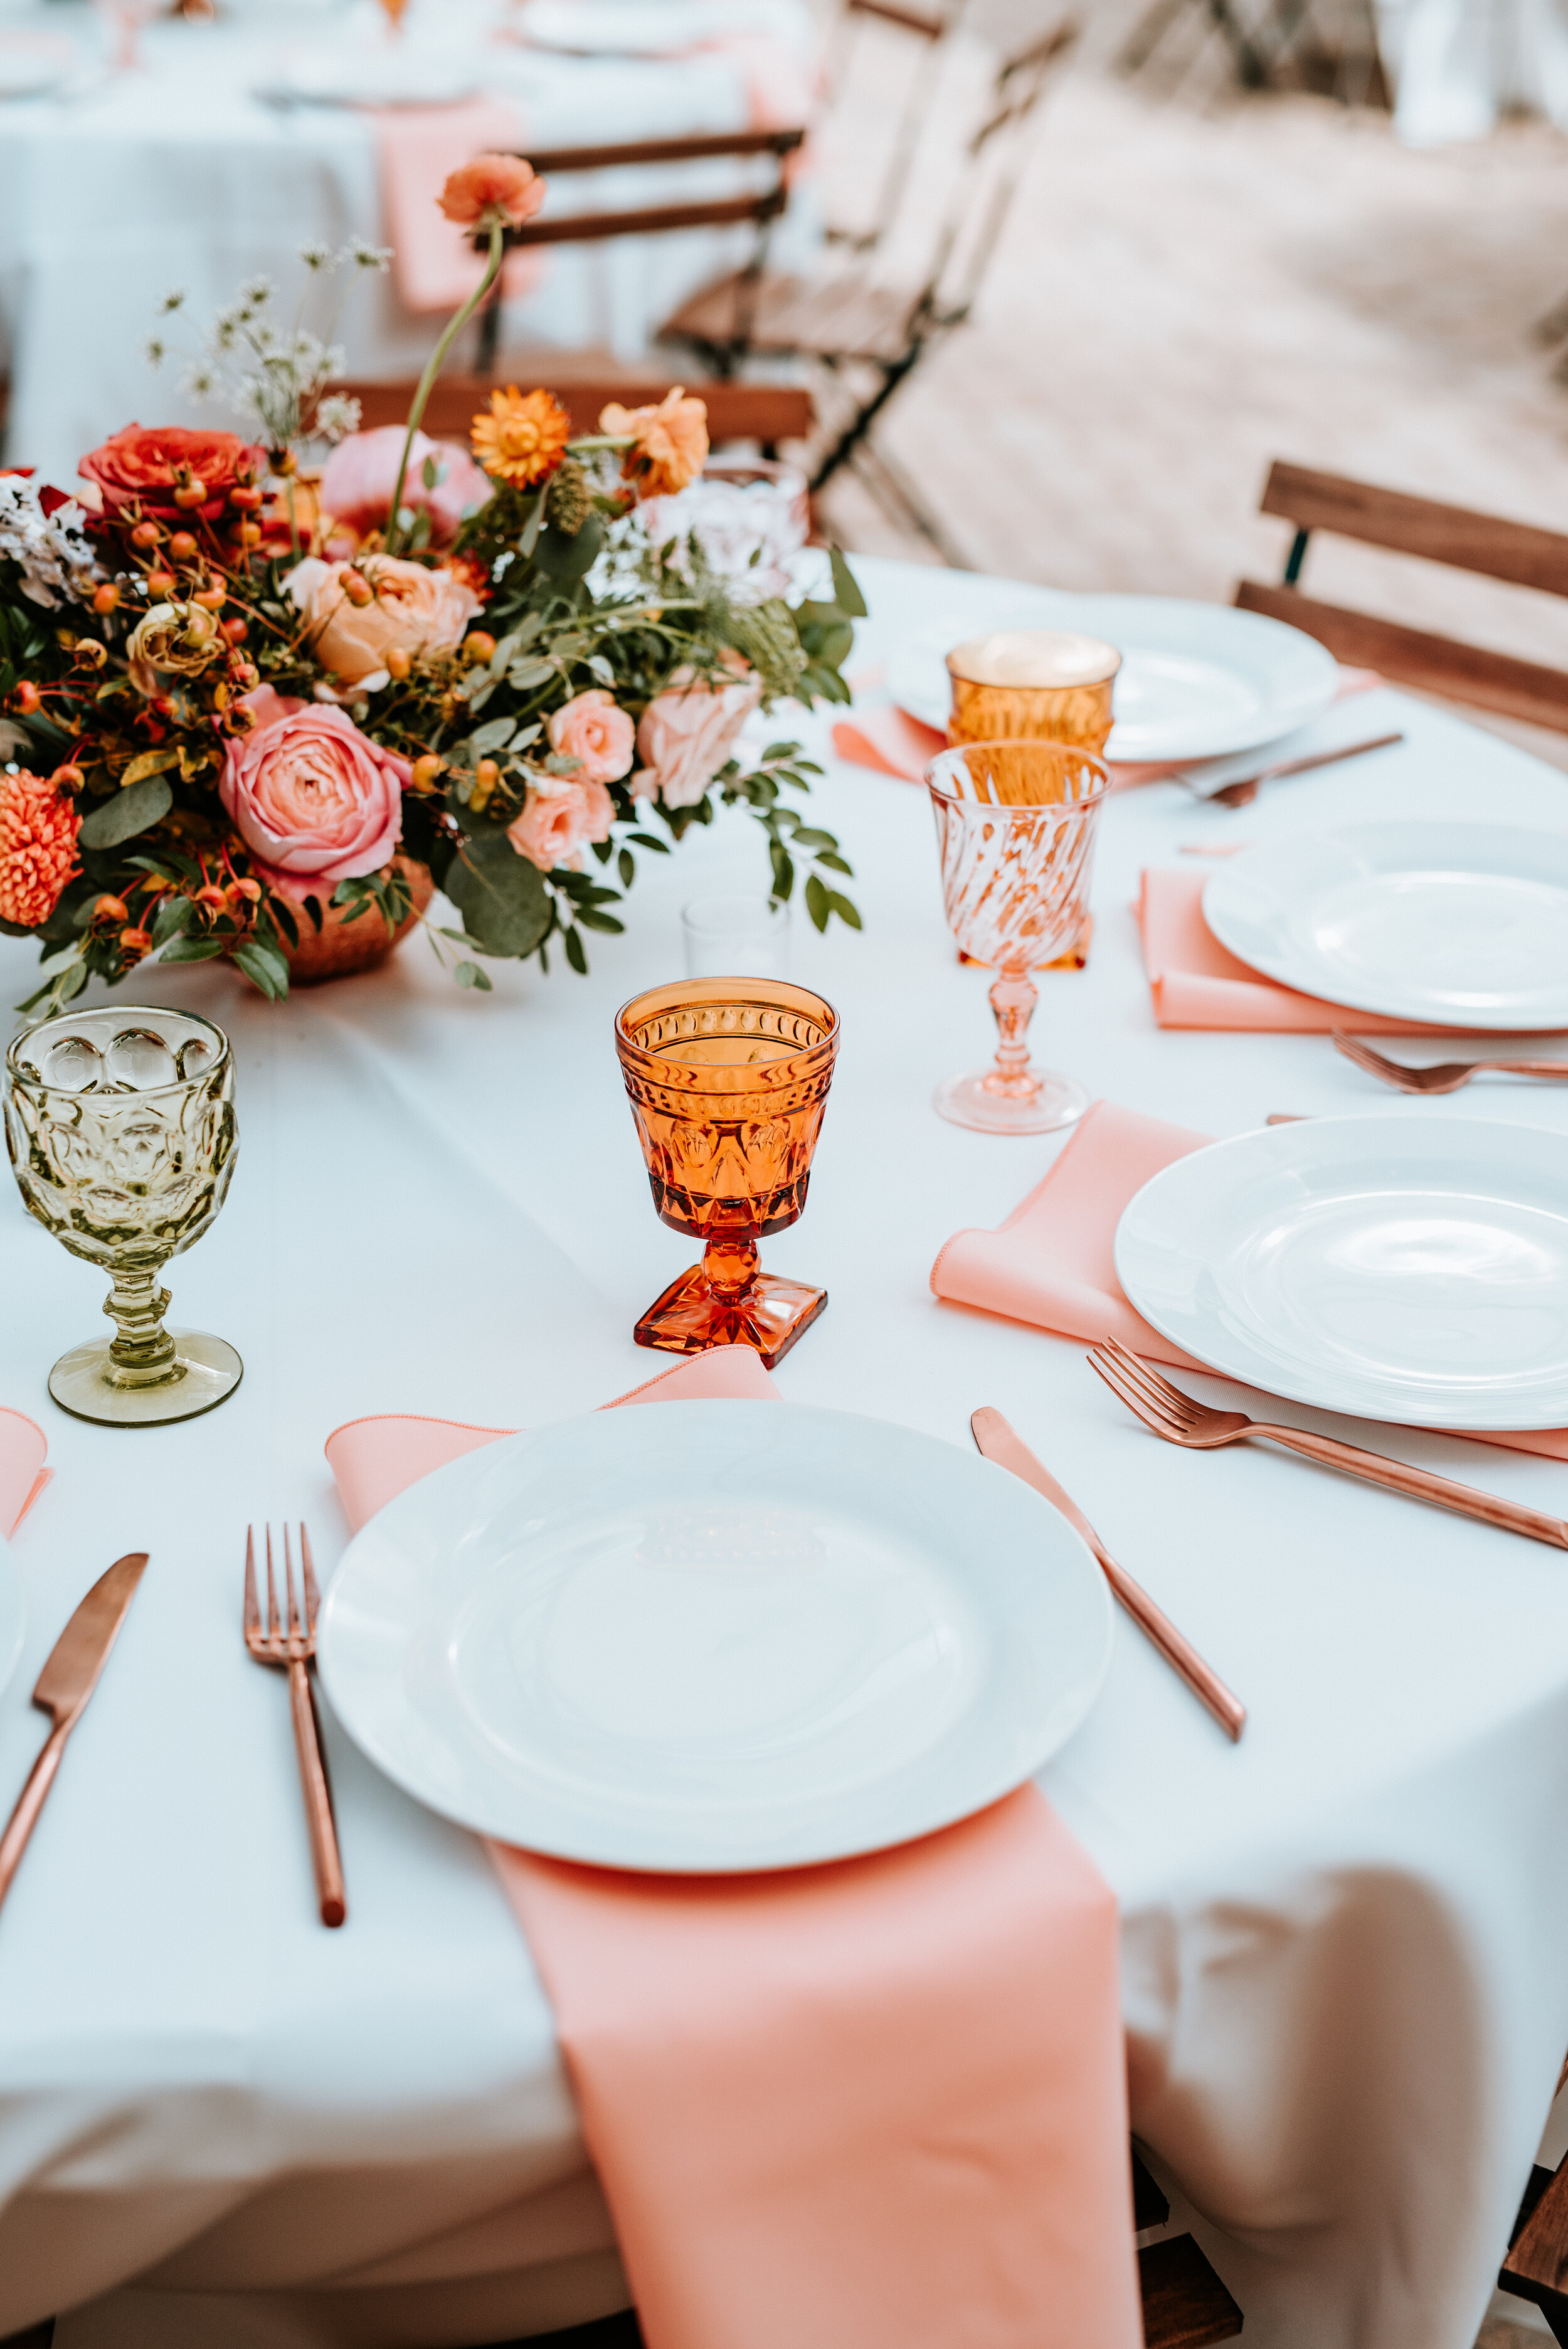 Greenhouse wedding reception with orange and peach flower arrangements of garden roses, ranunculus, berries, and wildflowers with asymmetrical, trailing greenery. Nashville wedding floral design.